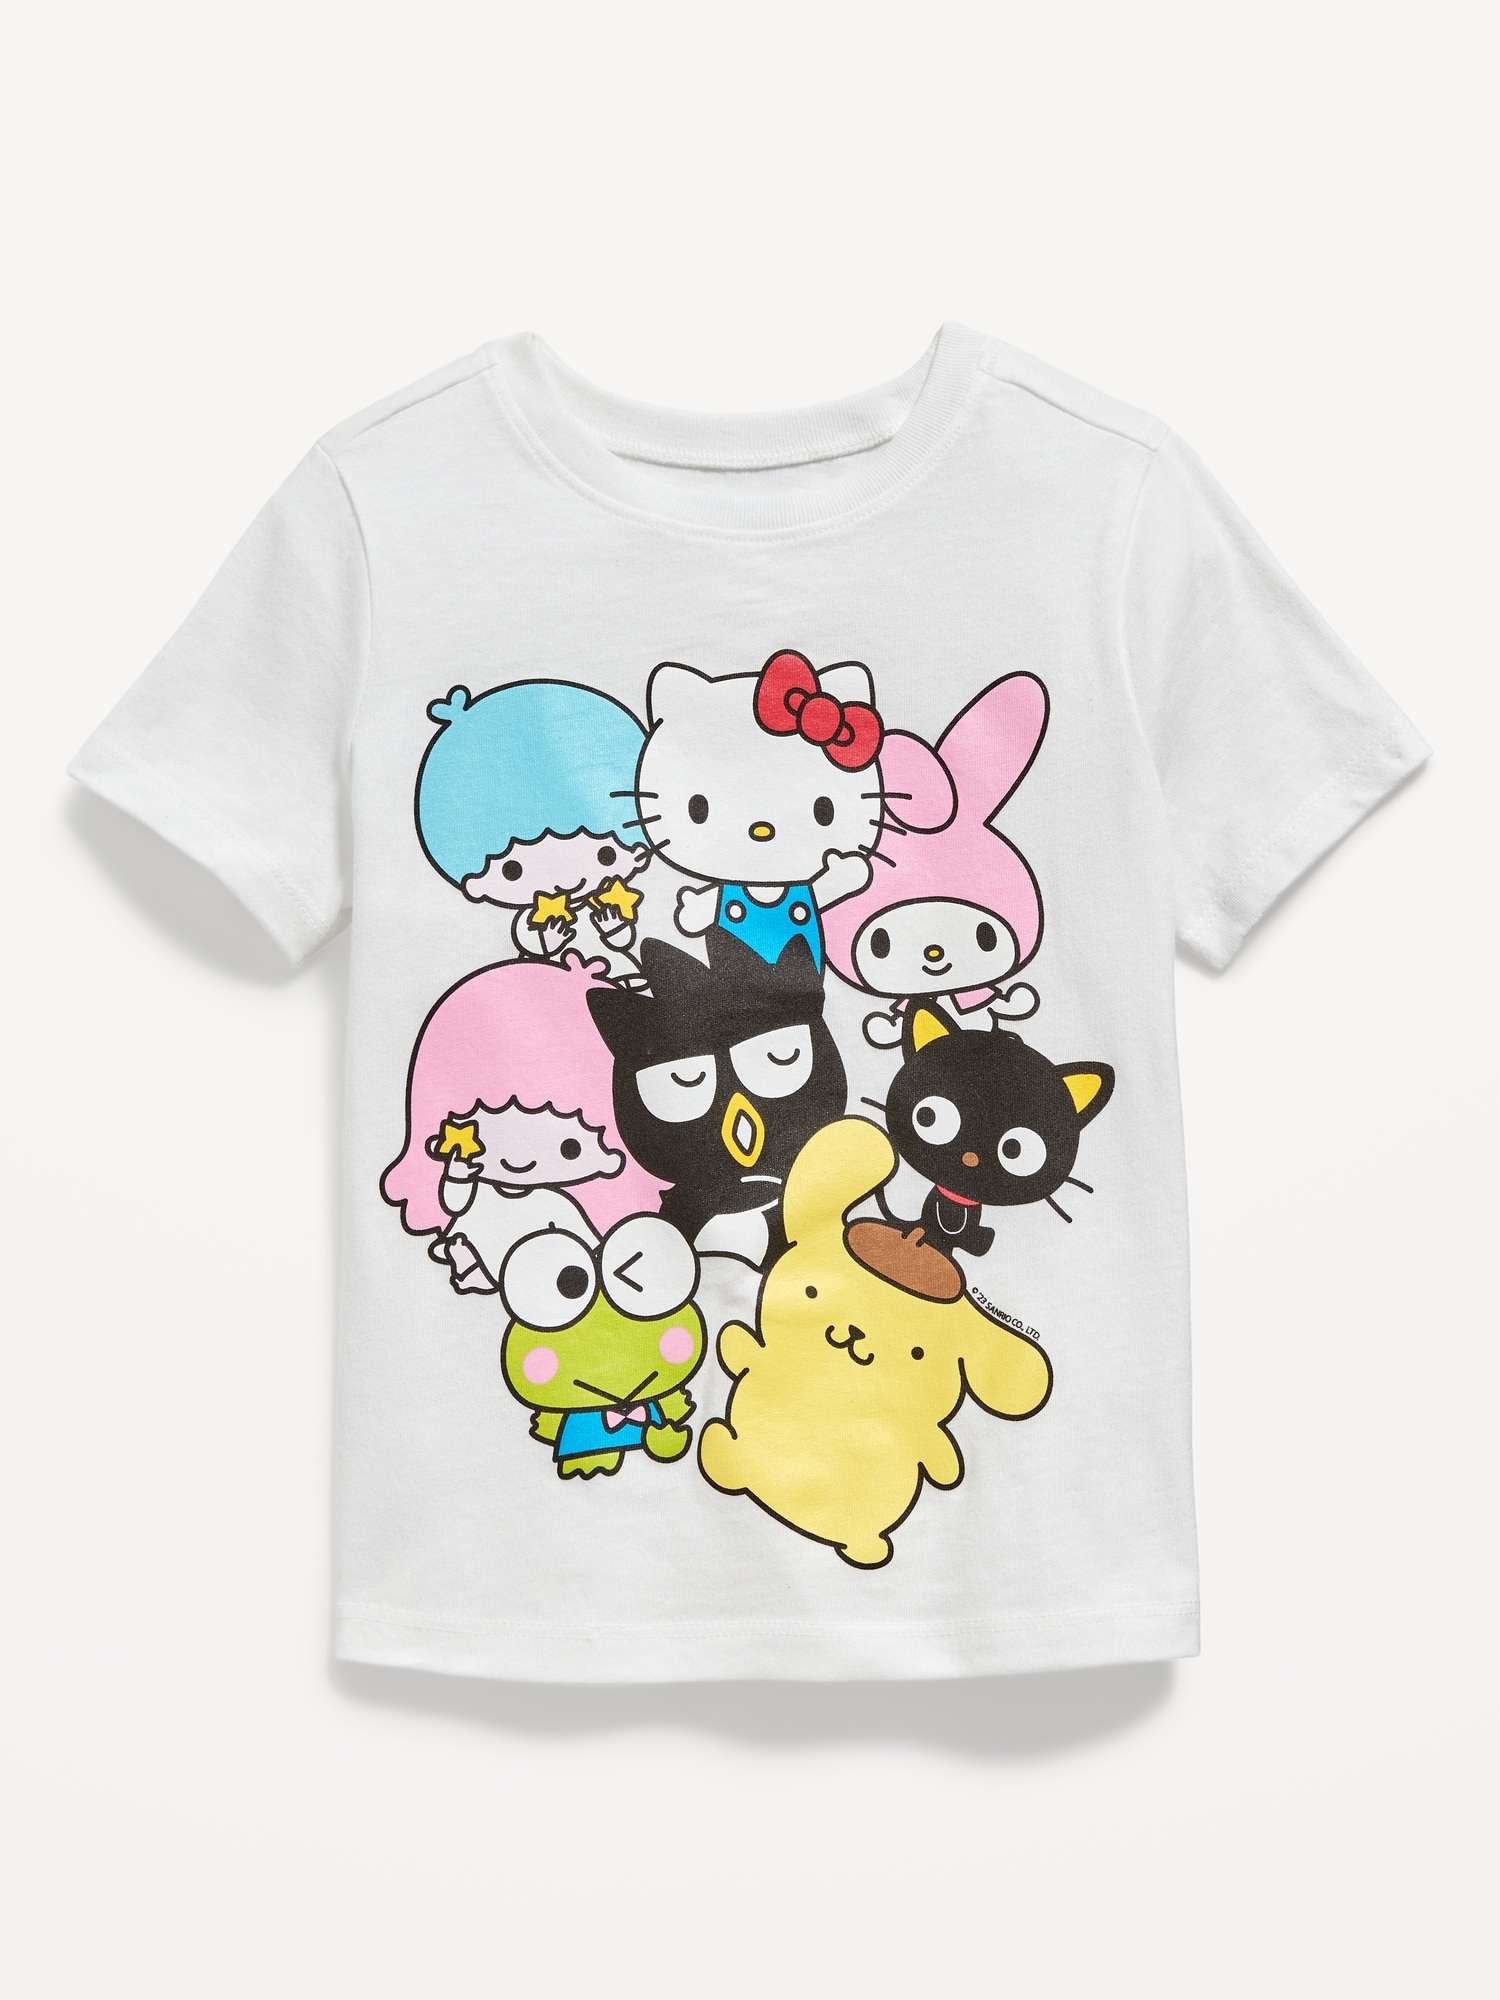 Matching Hello Kitty Graphic T-Shirt for Toddler Girls Hot Deal